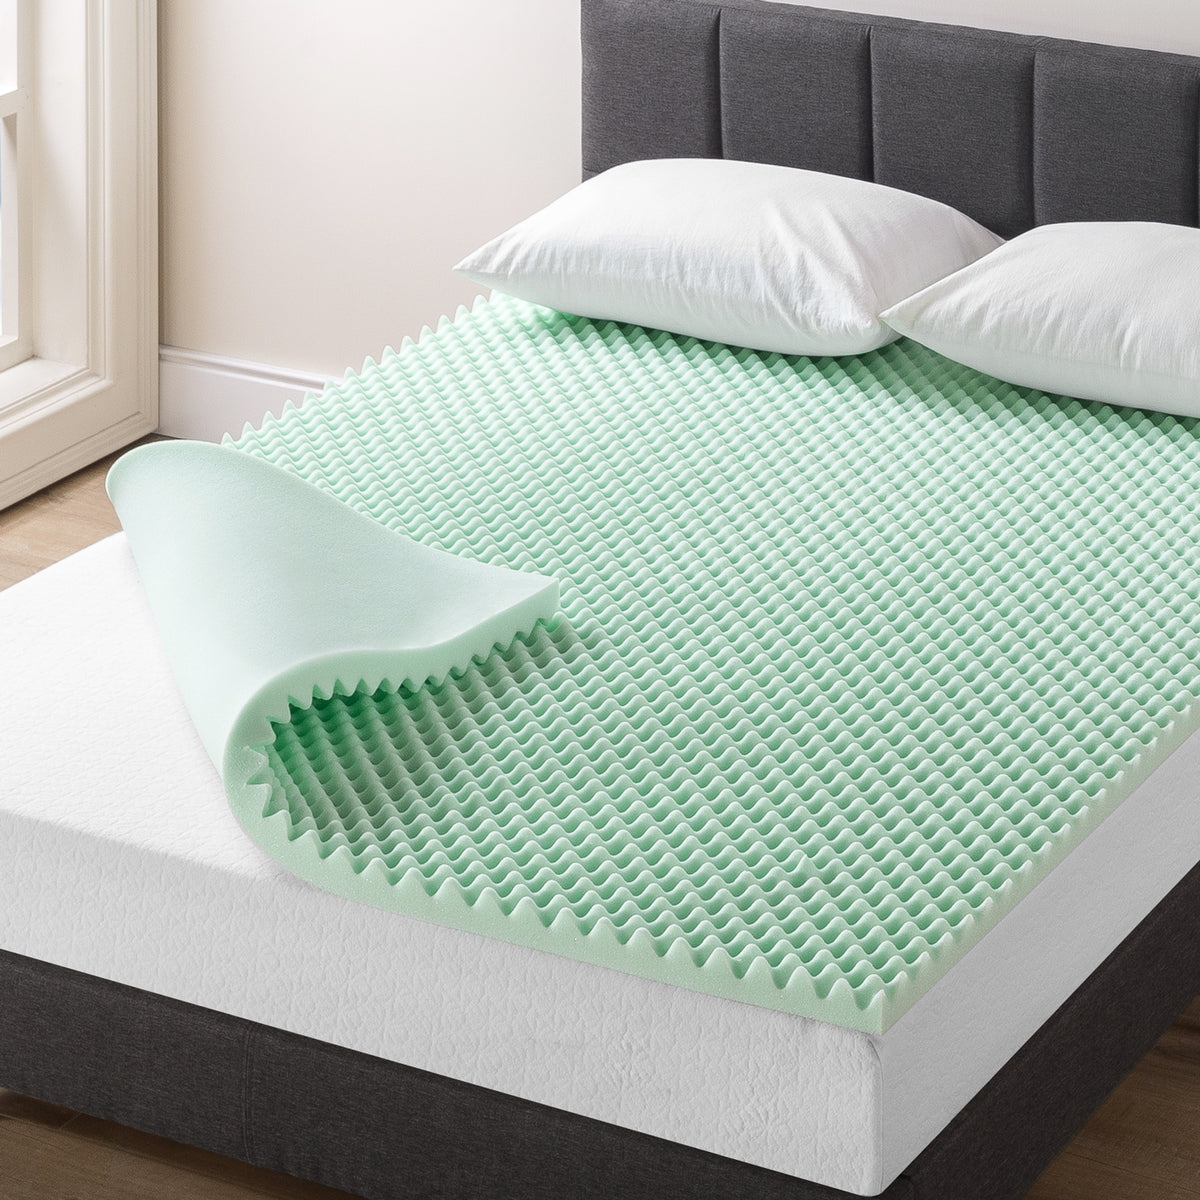 Egg Crate Foam perfect for beds, camping, portable beds & packing